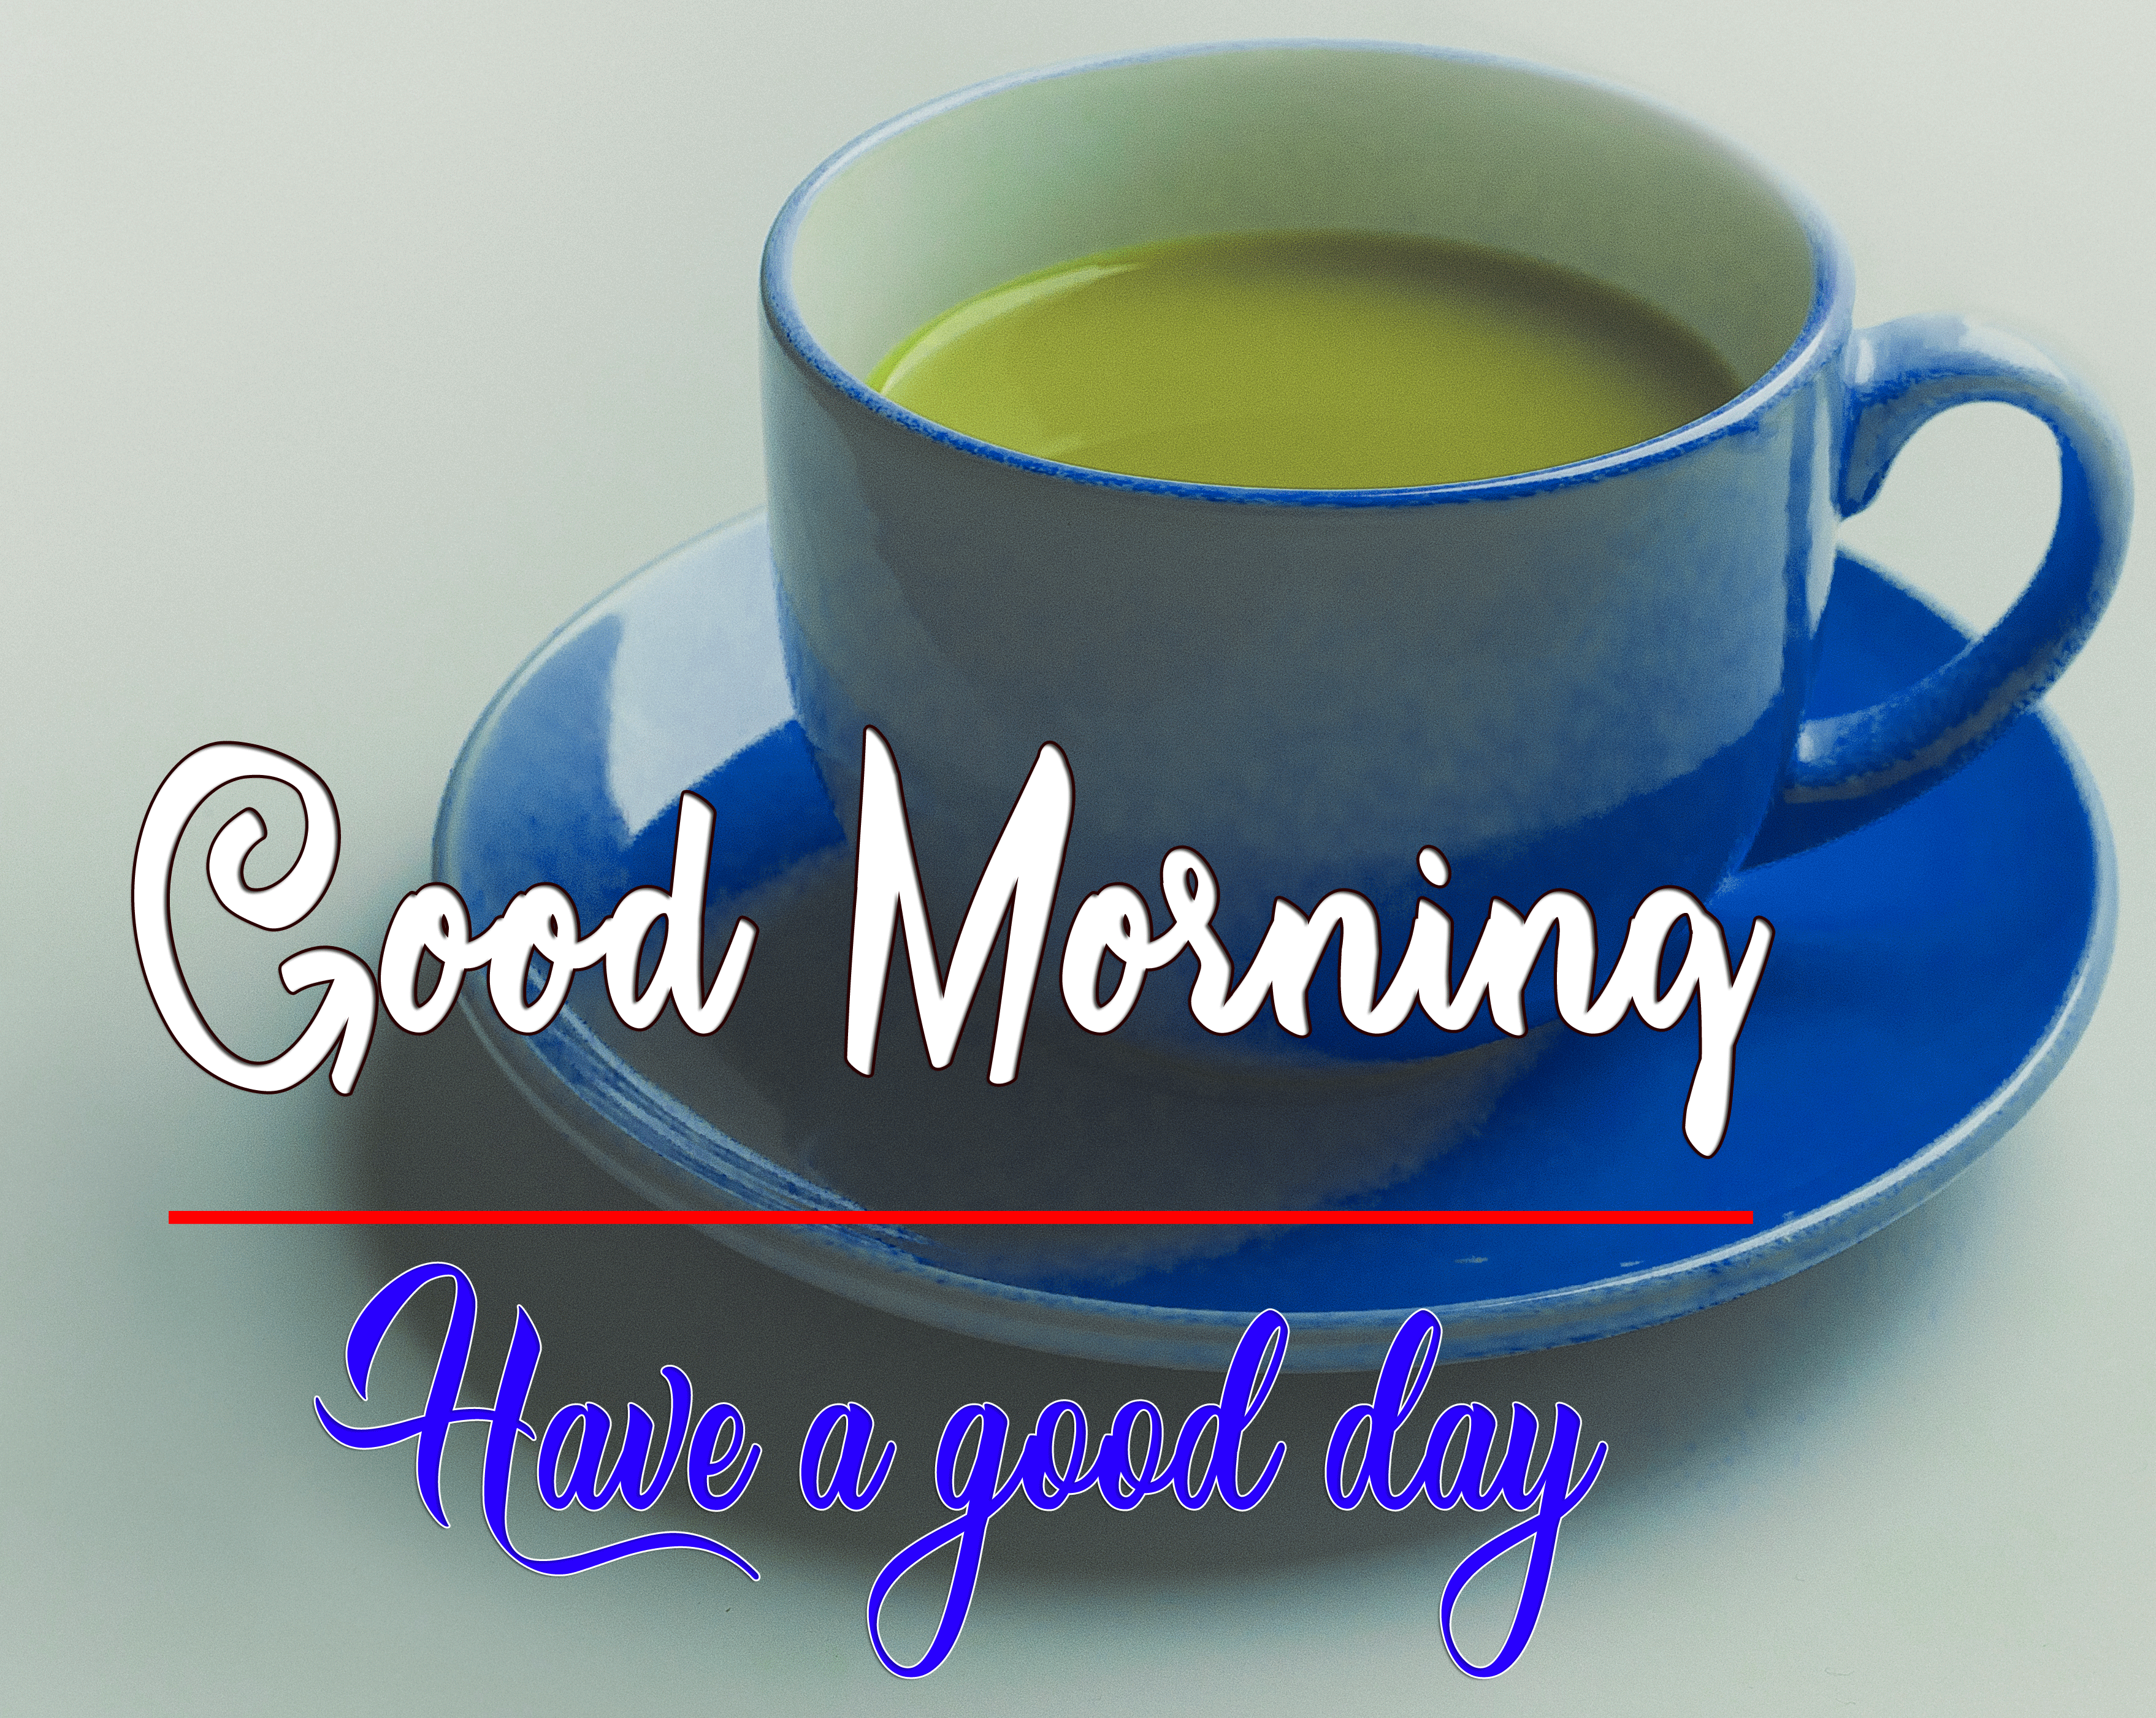 Good Morning Wishes Images HD 1080p 50